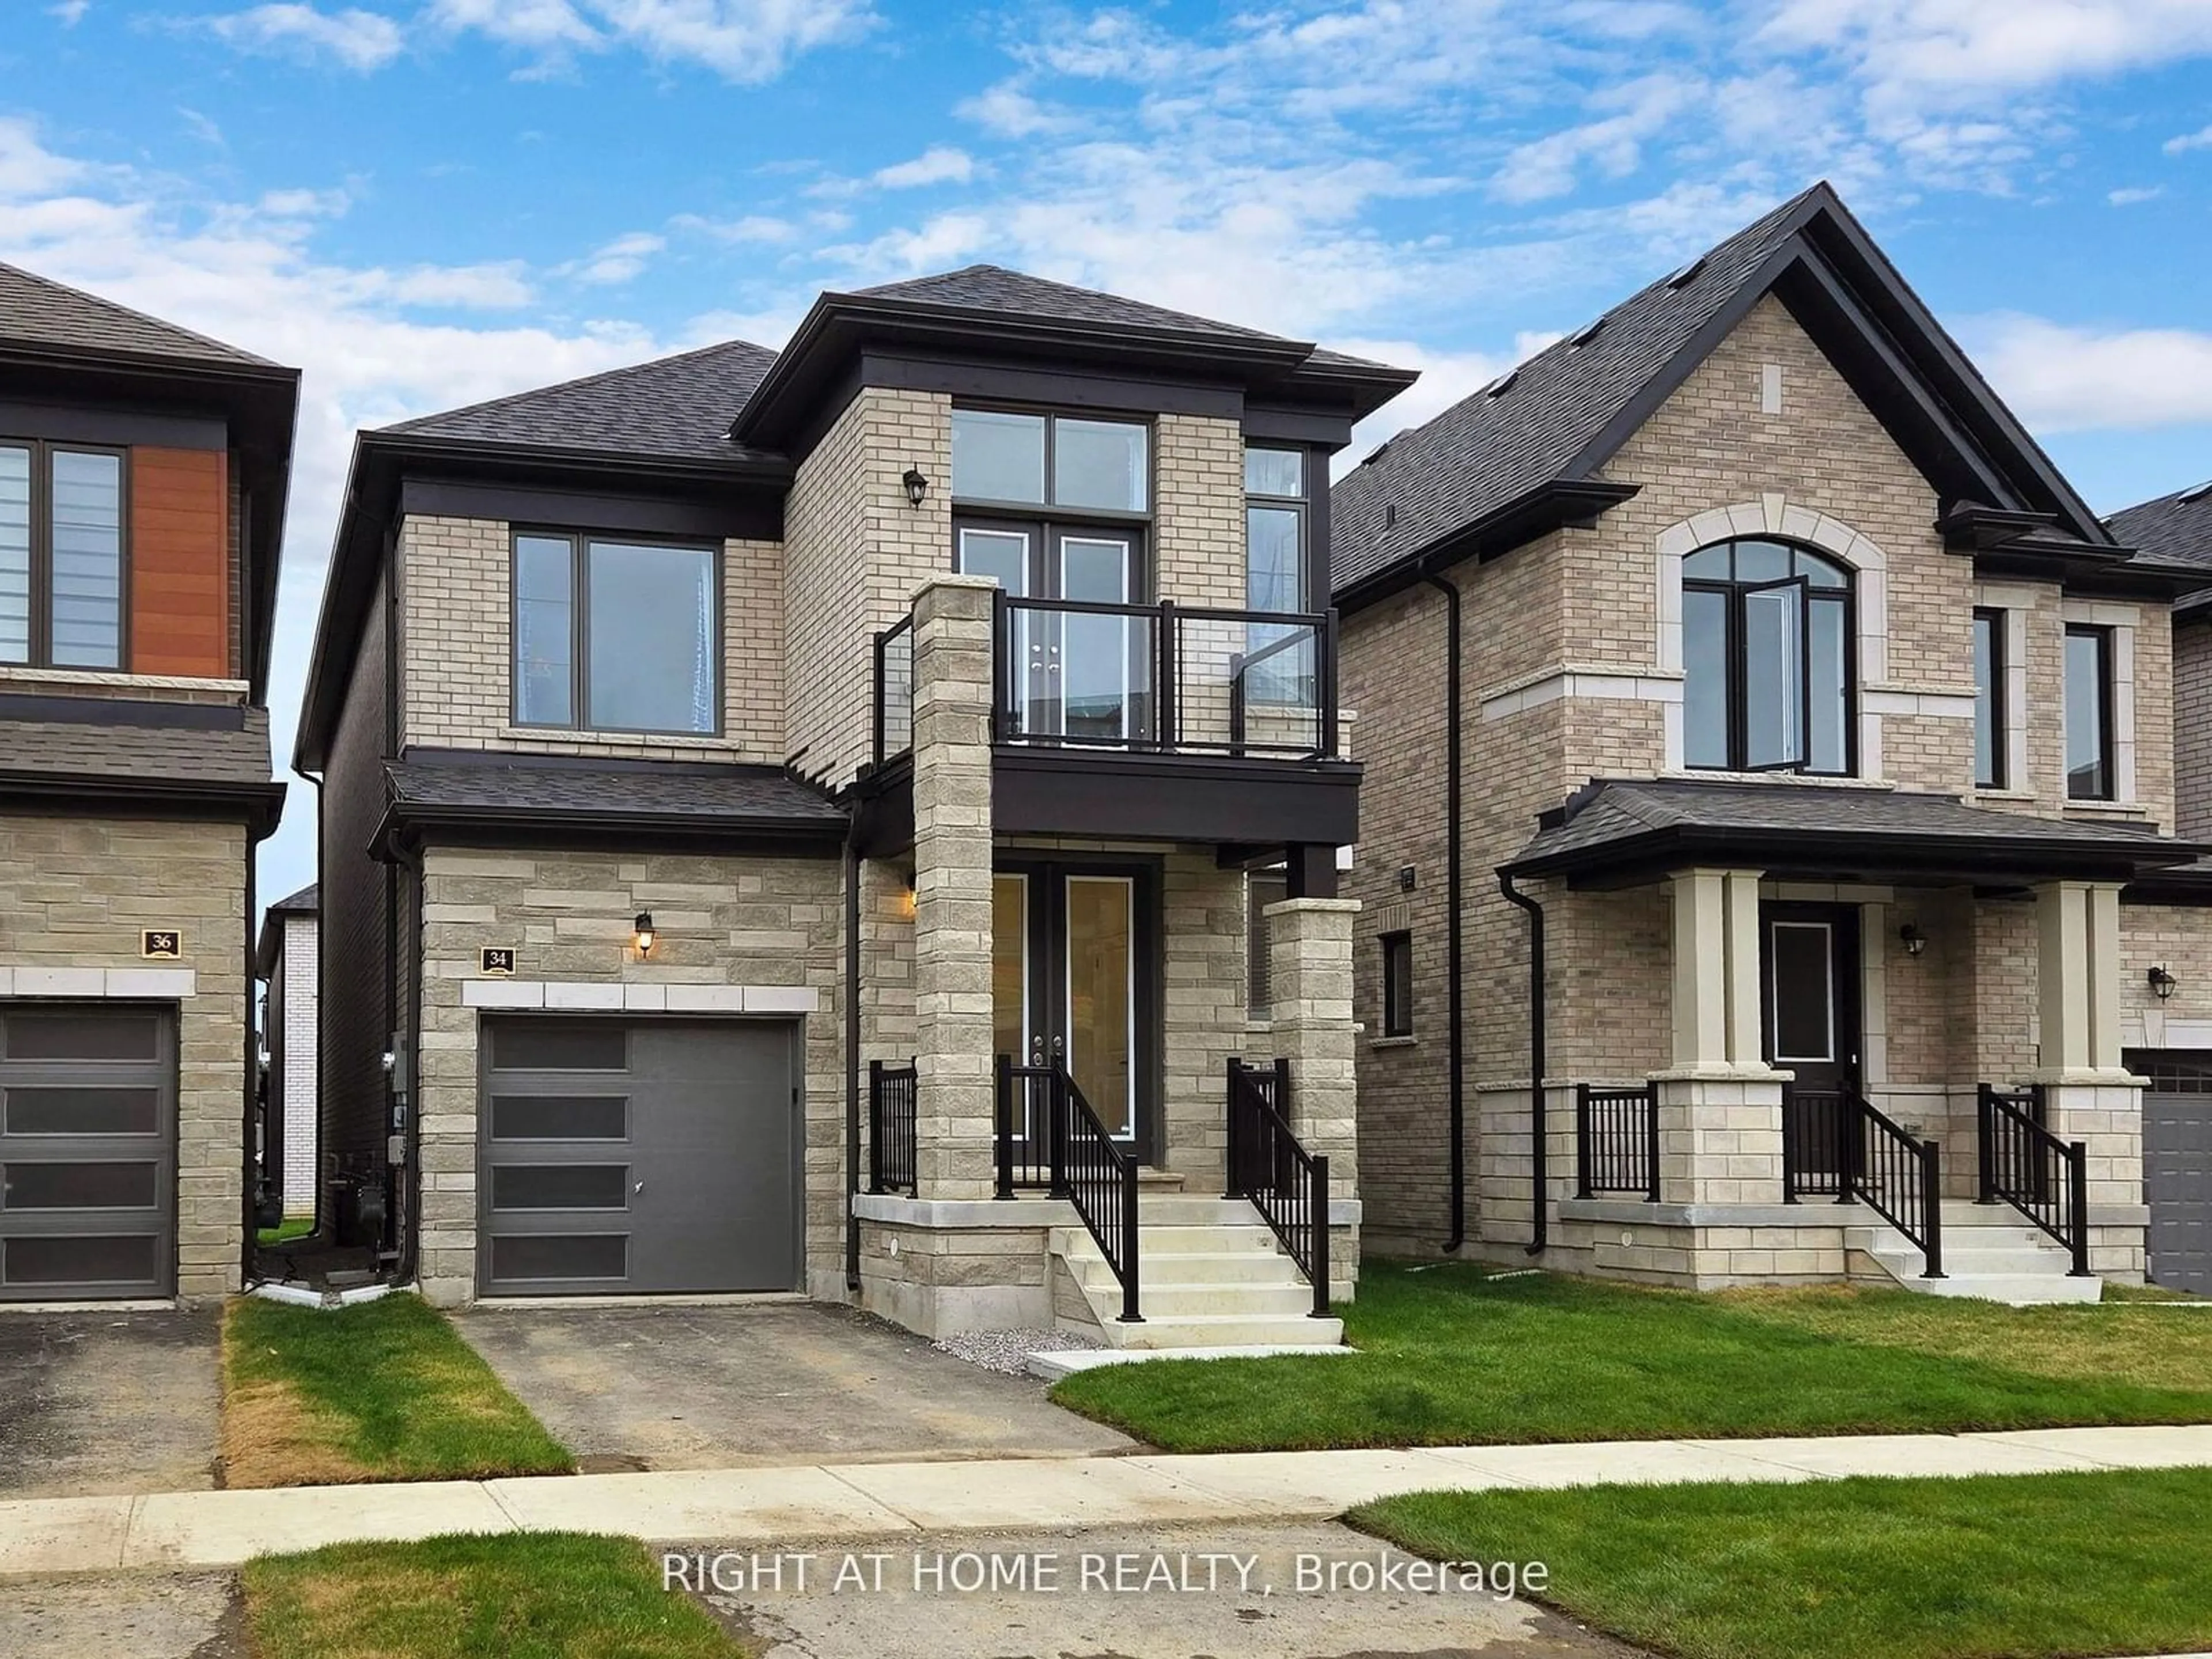 Home with brick exterior material for 34 Camino Real Dr, Caledon Ontario L7C 1Z9